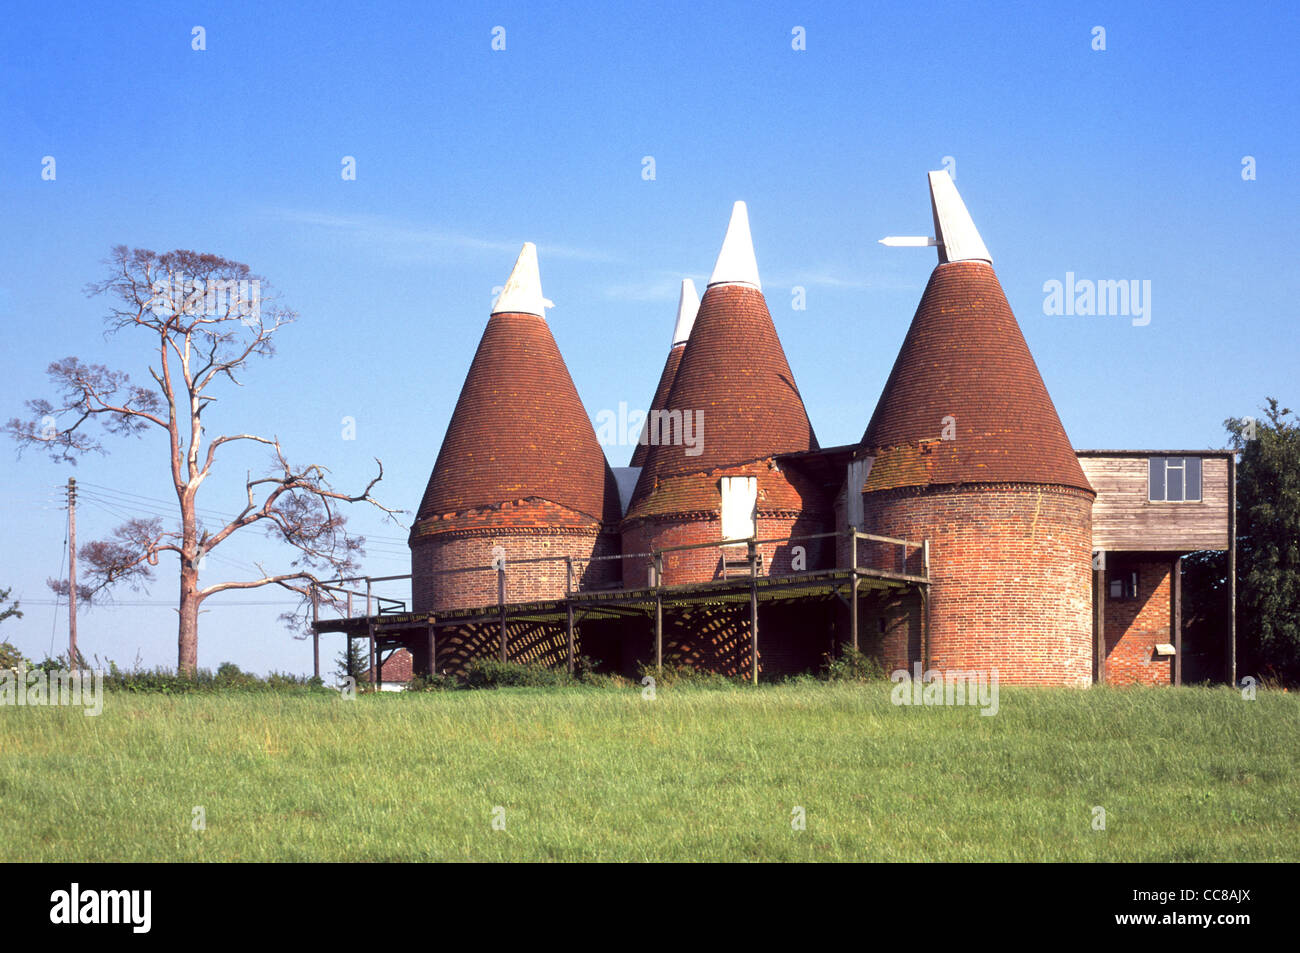 Historical building Oast house used for kiln drying of hops in beer brewing now nostalgic heritage feature of Weald of Kent English countryside UK Stock Photo